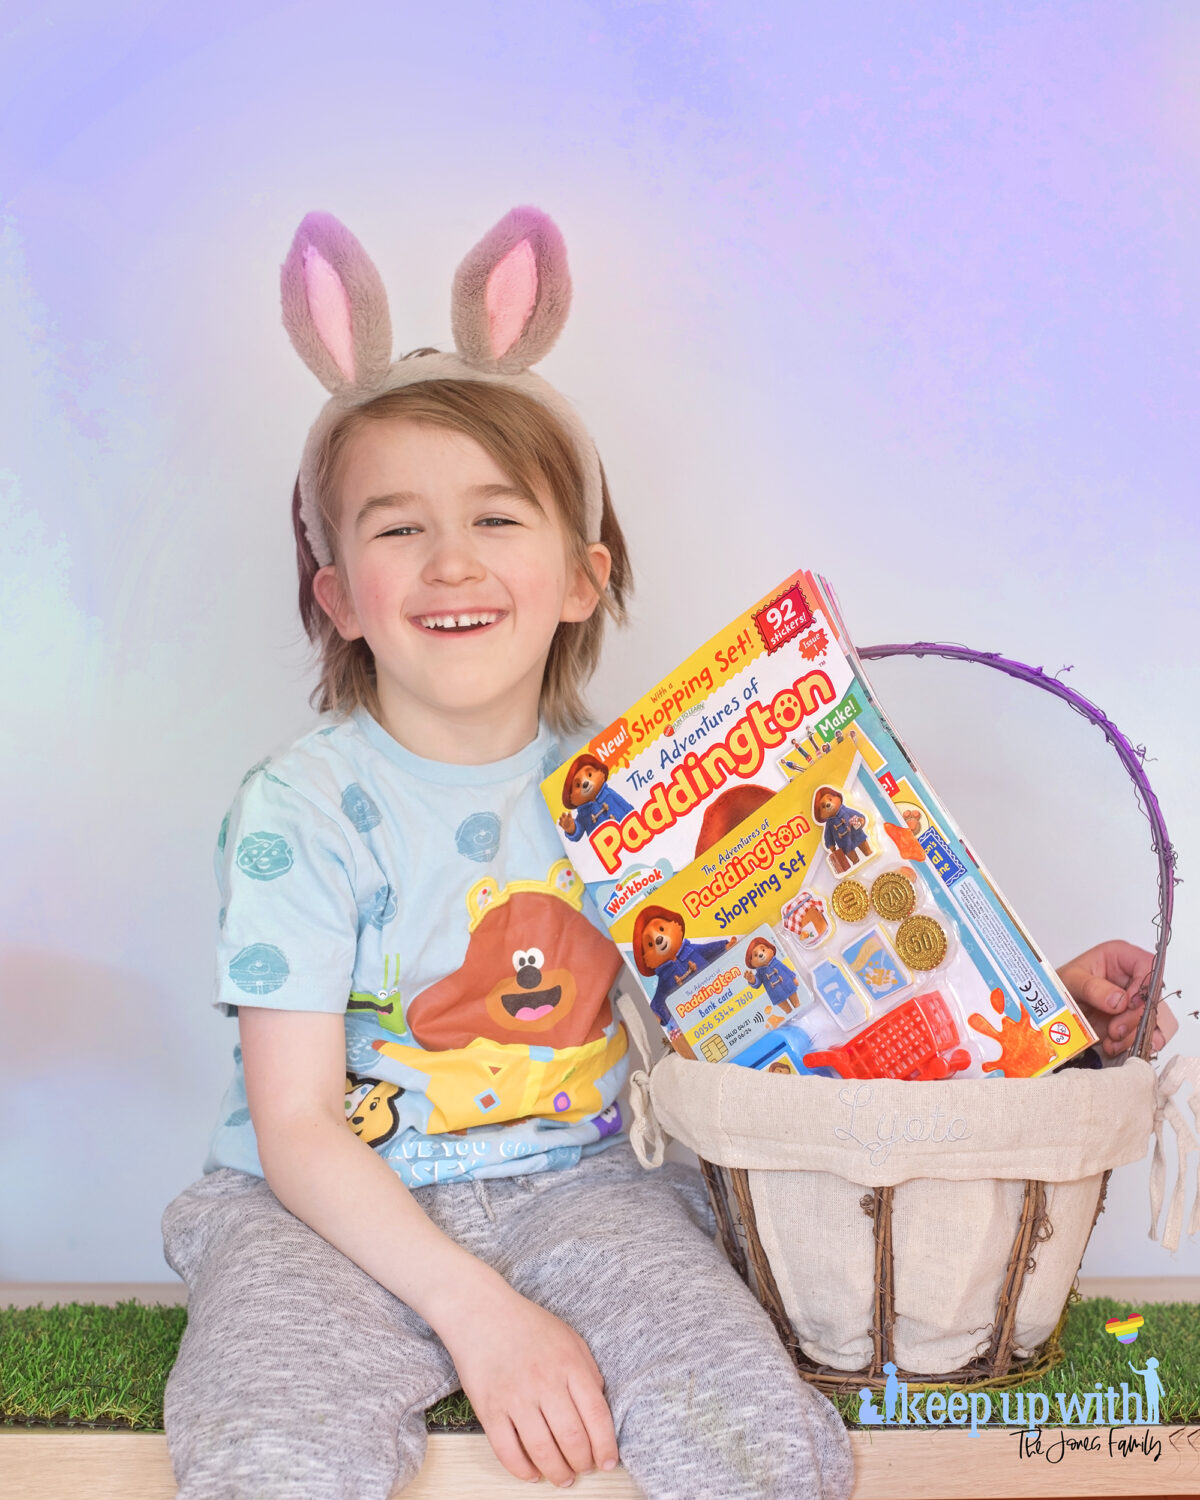 The Adventures of Paddington Bear Magazine EYFS. Photograph shows a boy with grey and pink rabbit ears wearing grey tacksuit bottoms and an aqua coloured Hey Duggee Cbeebies t-shirt for children in need 2020.  The boy is sat on artificial grass and holding an easter basket which contain the new Adventures of paddington magazine. He is smiling.  